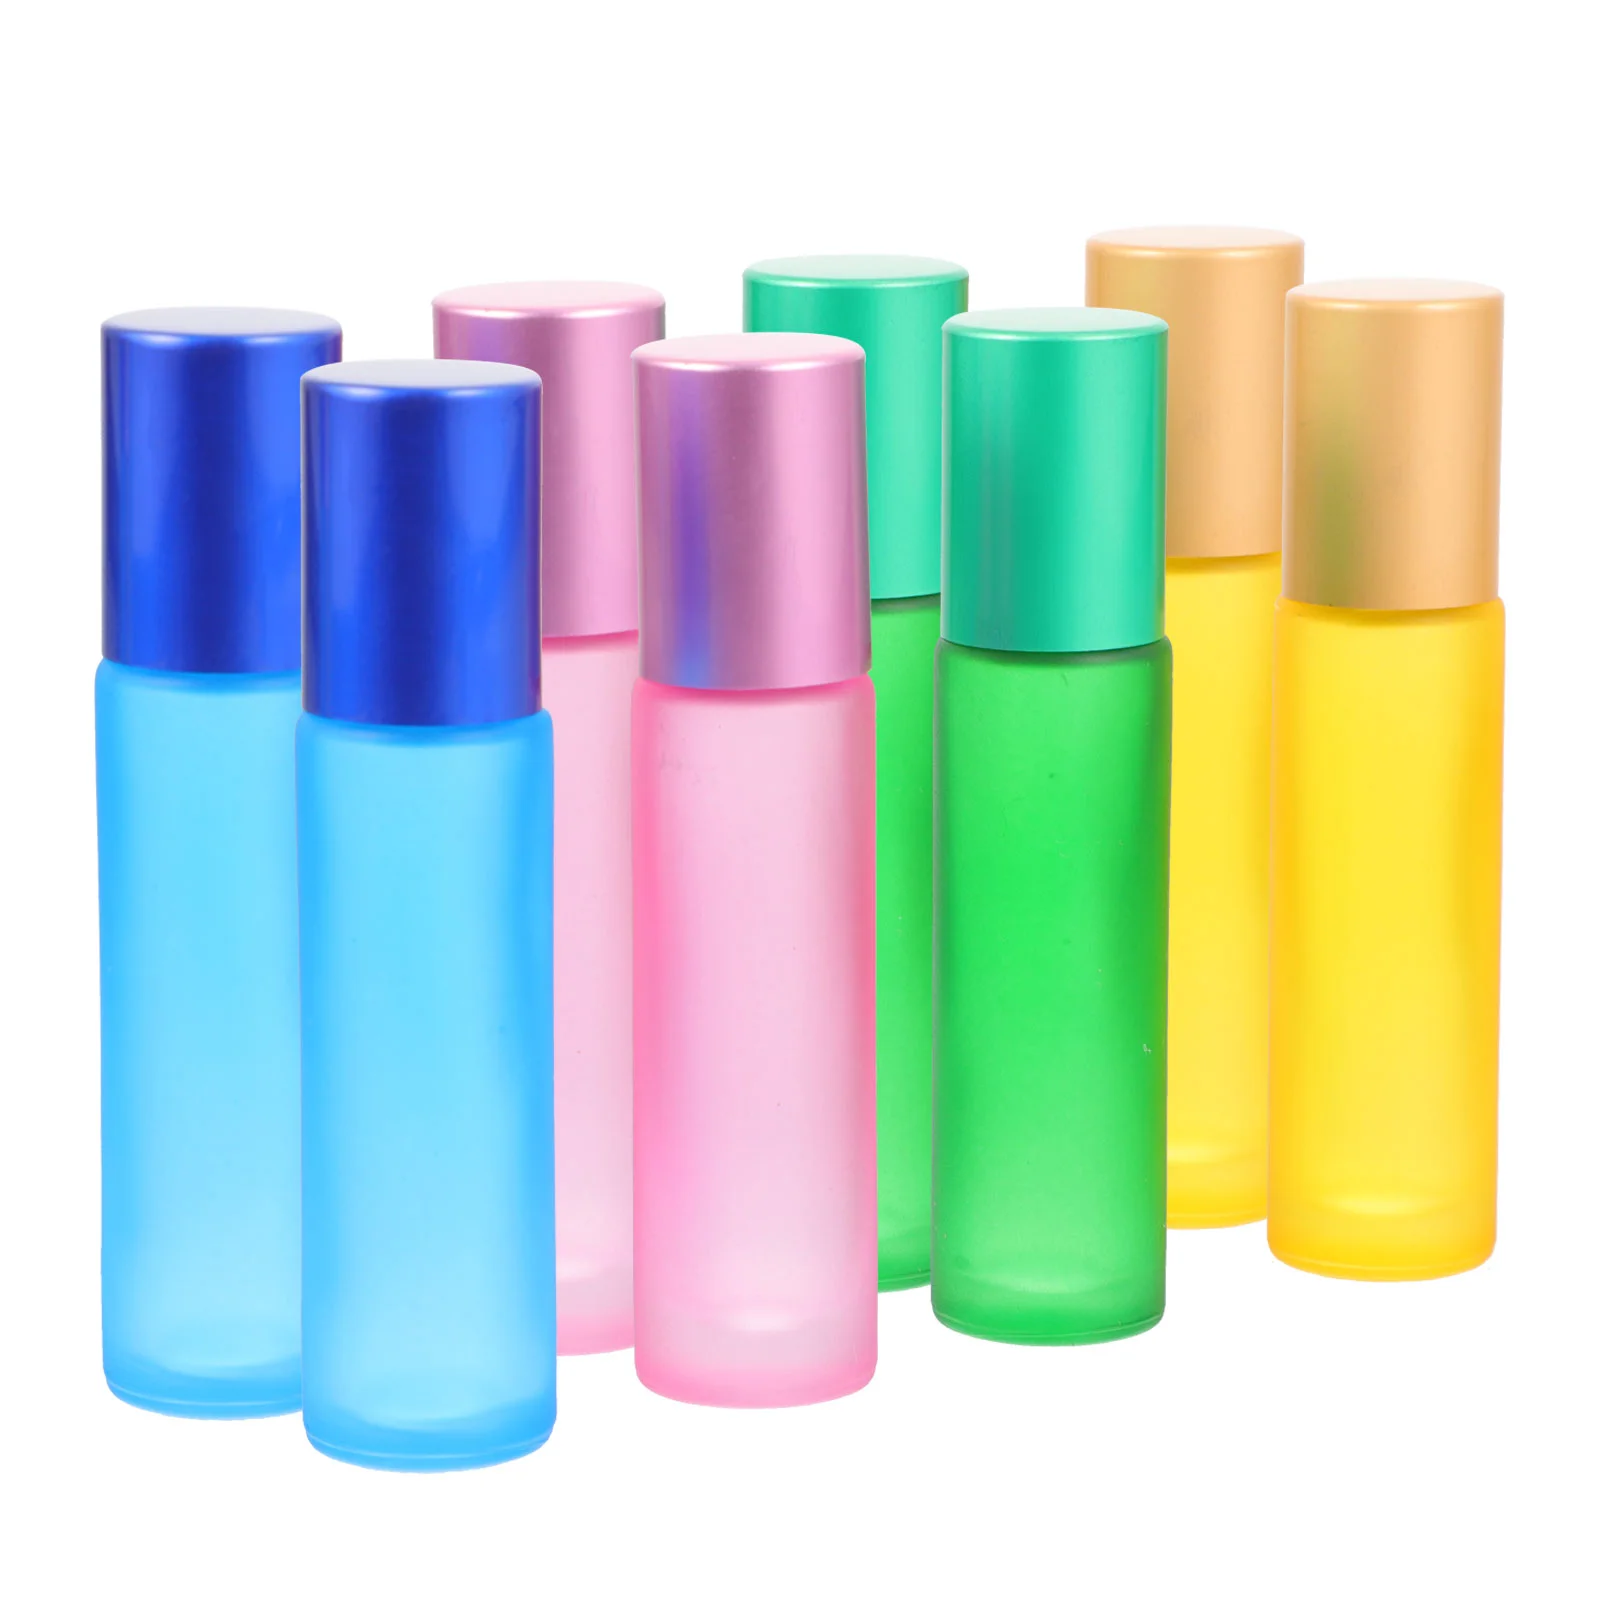 

Bottles Roller Roll Bottle Essential Oil Empty Perfume Refillable Sample Amber Sub Aromatherapy Vial Tubes Compact 10Ml Frosted